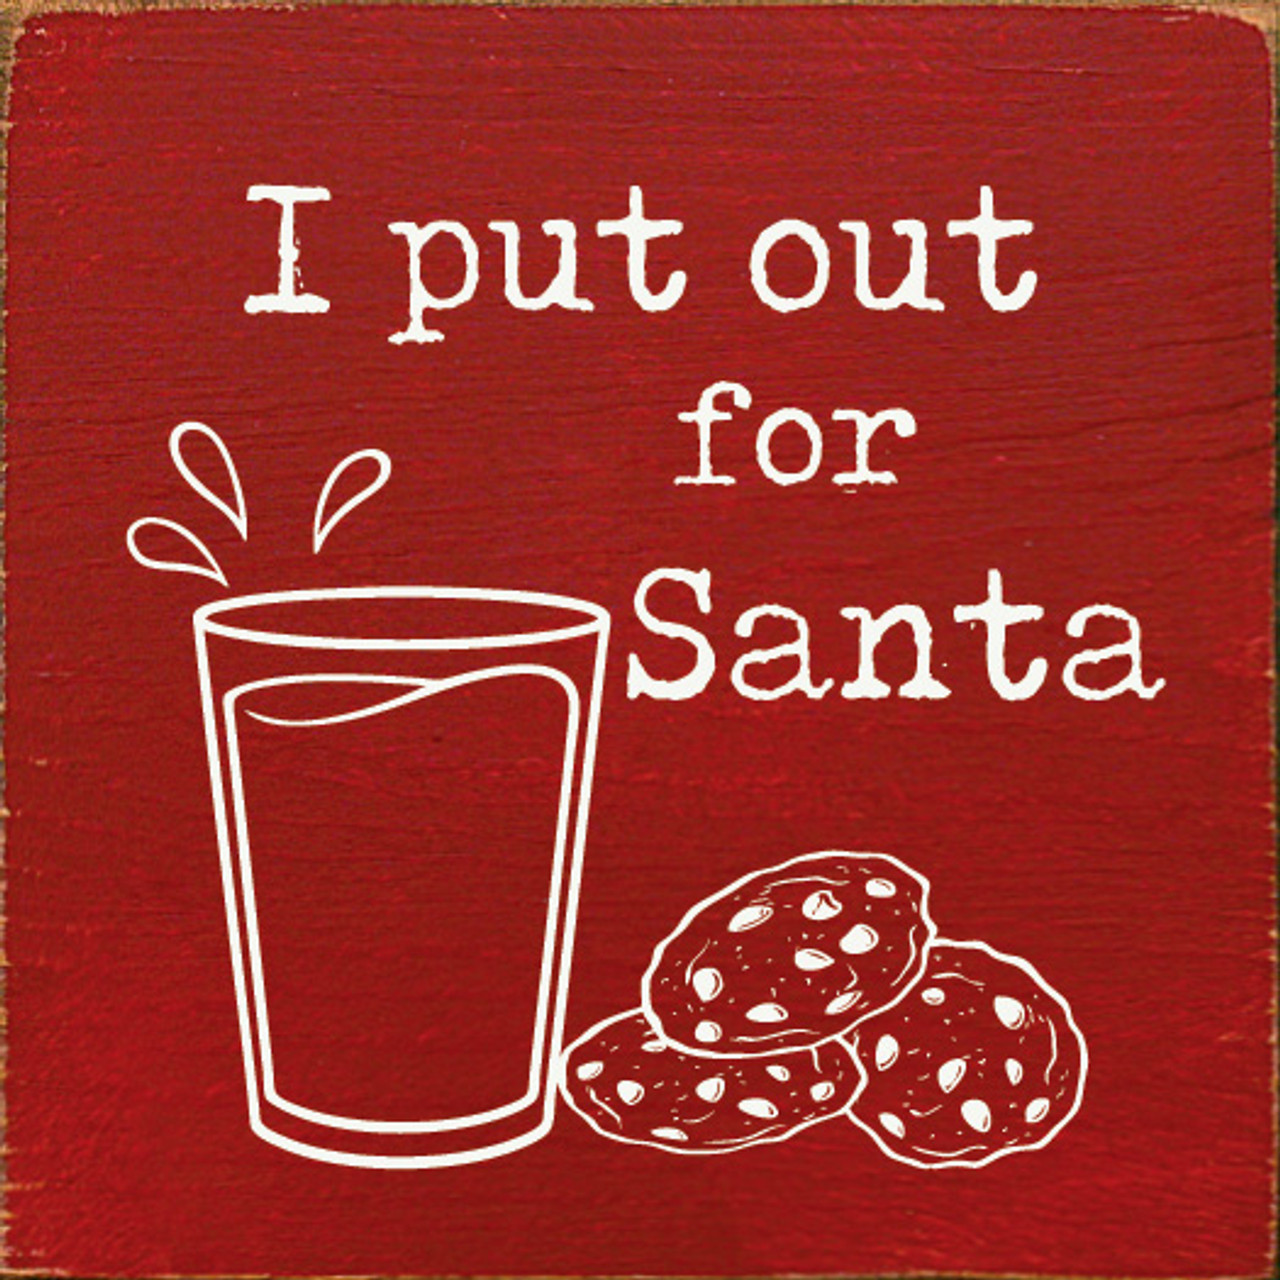 We're whipping up a nice hot treat for Santa! 🎅 Let's make a